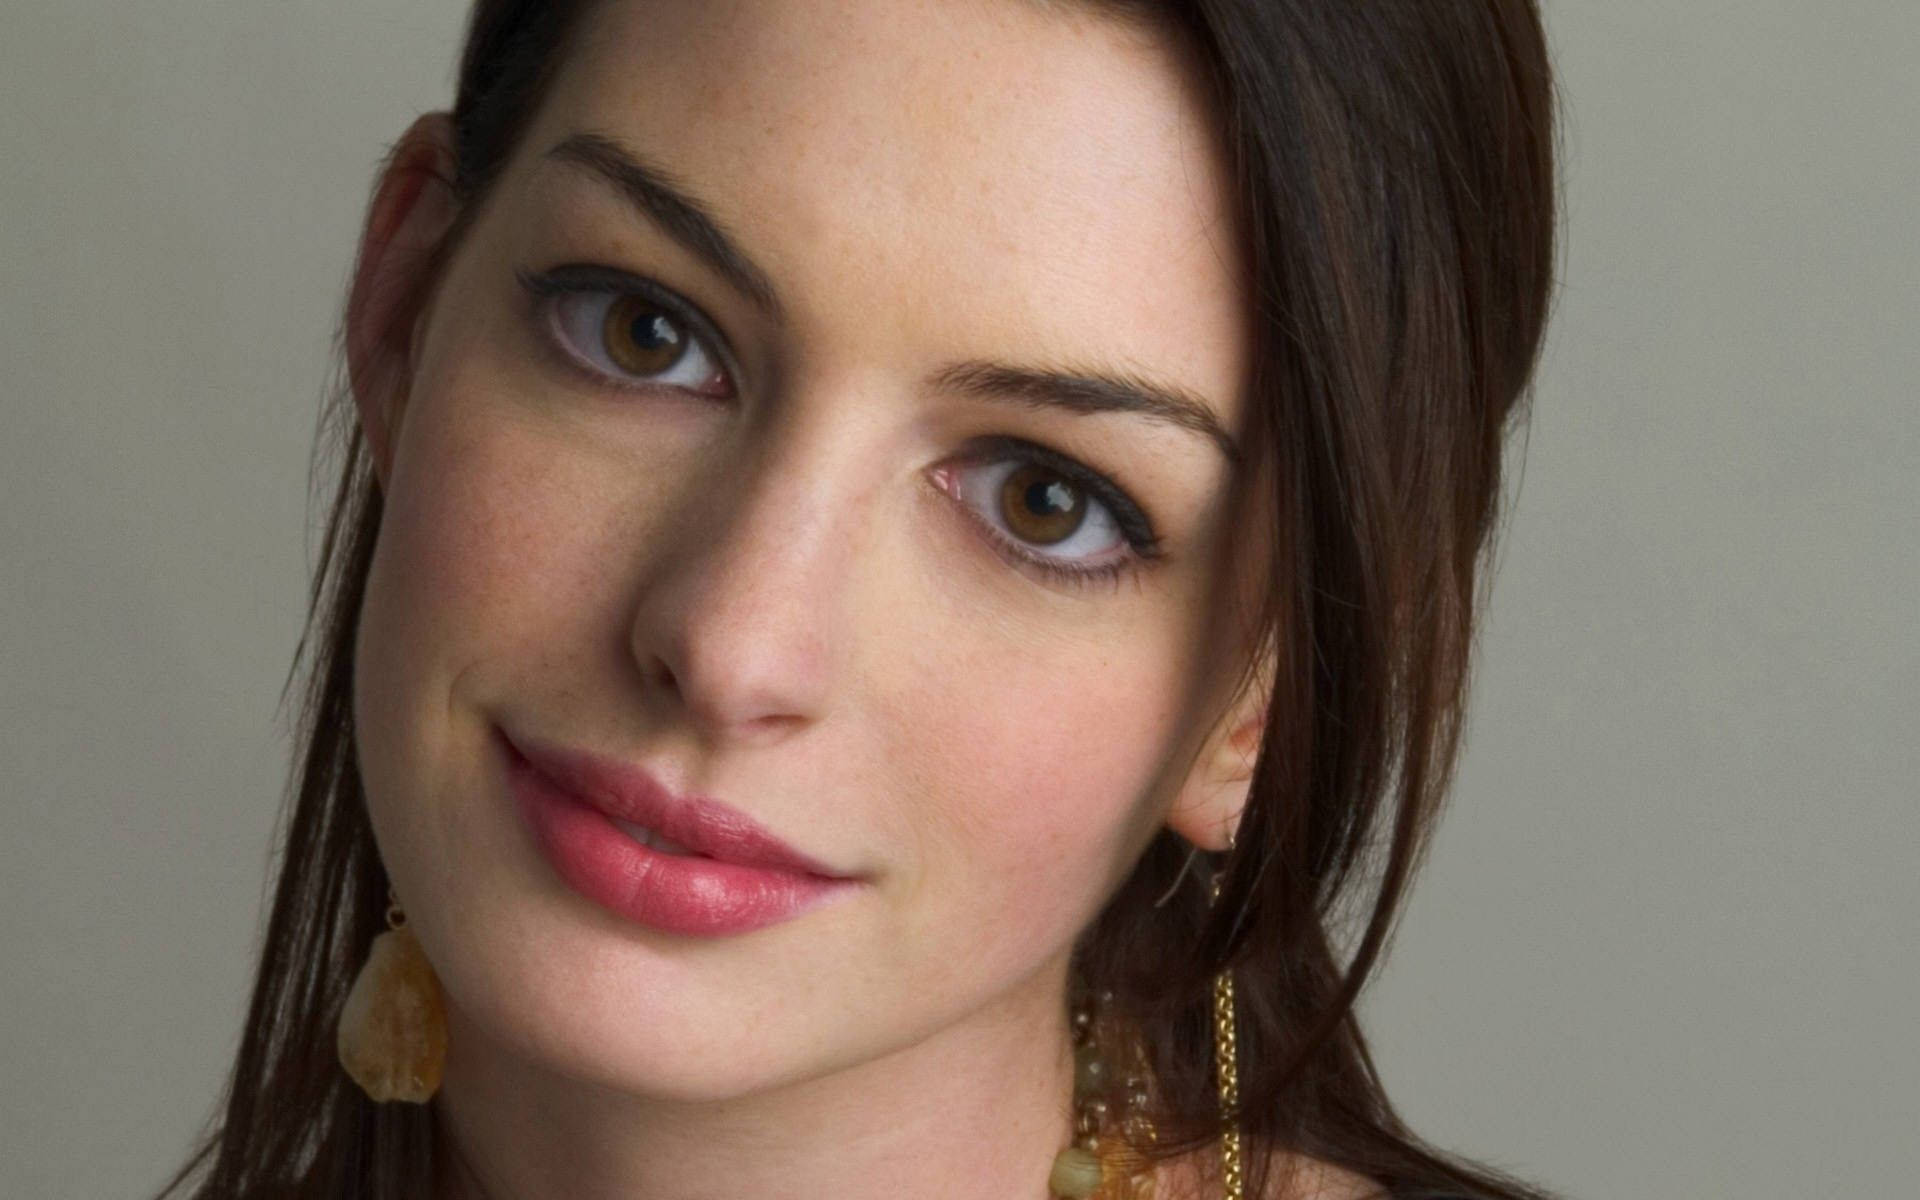 Close-up Portrait Of Anne Hathaway Wallpaper